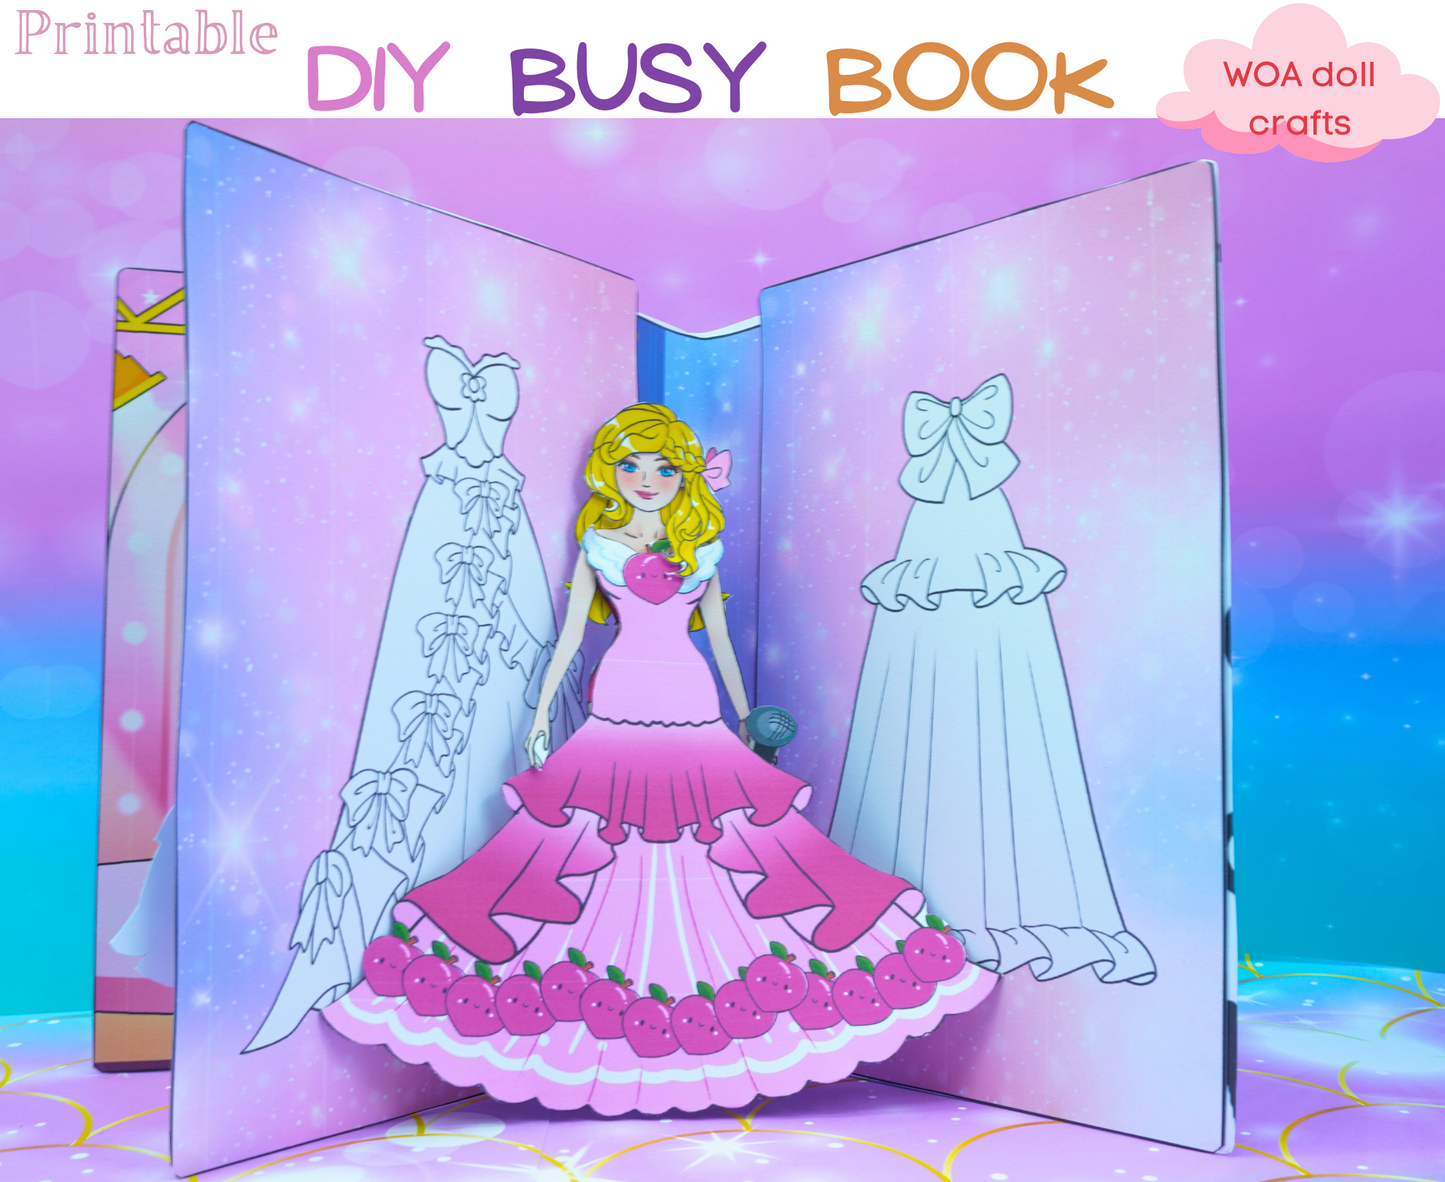 Barbie Singer Printables🎤 Gorgeous wardrobe for Barbie singer dolls | Music accessories for Barbie | Gifts for your little ones who love to sing 🎁  Woa Doll Crafts